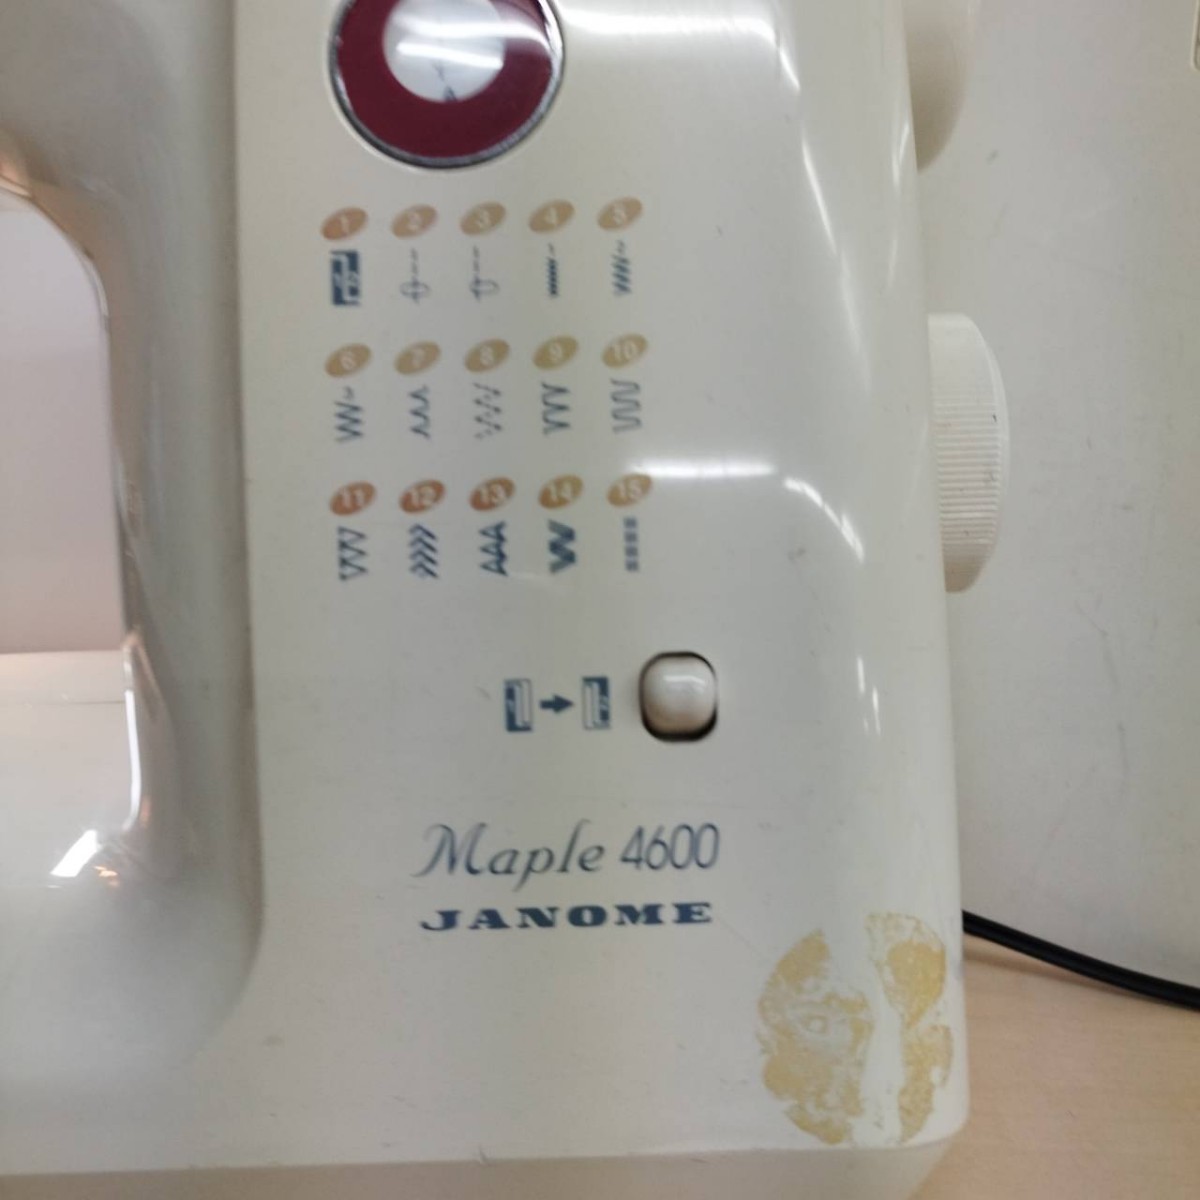 JANOME ジャノメ Maple 4600 ミシン 家庭用ミシン 手工芸 裁縫 _画像3